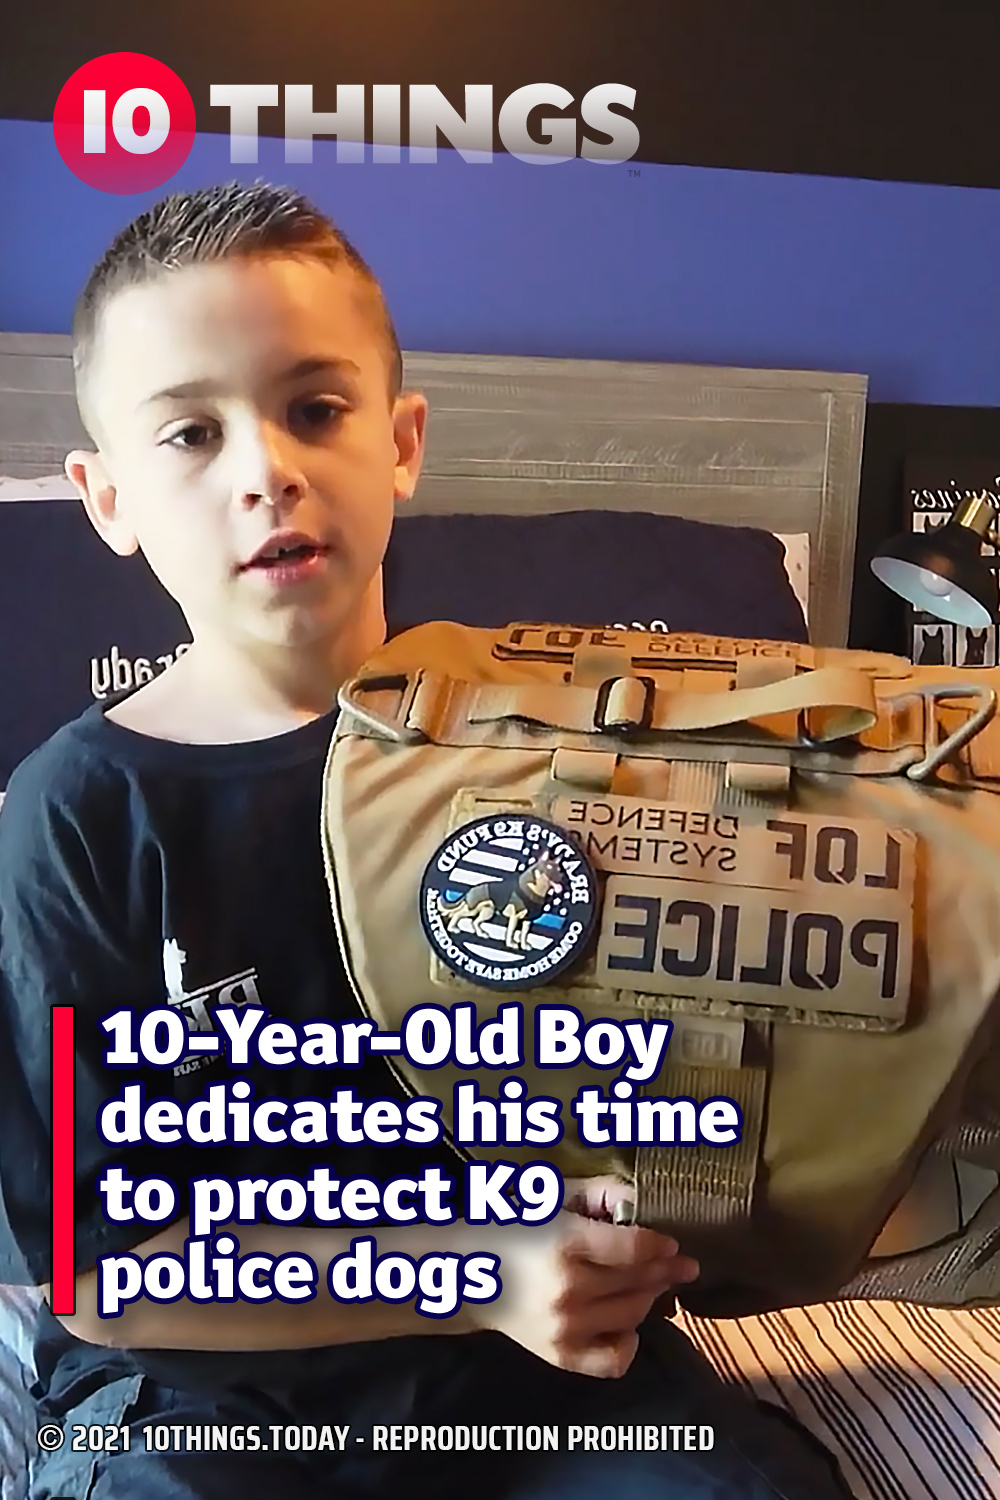 10-Year-Old Boy dedicates his time to protect K9 police dogs